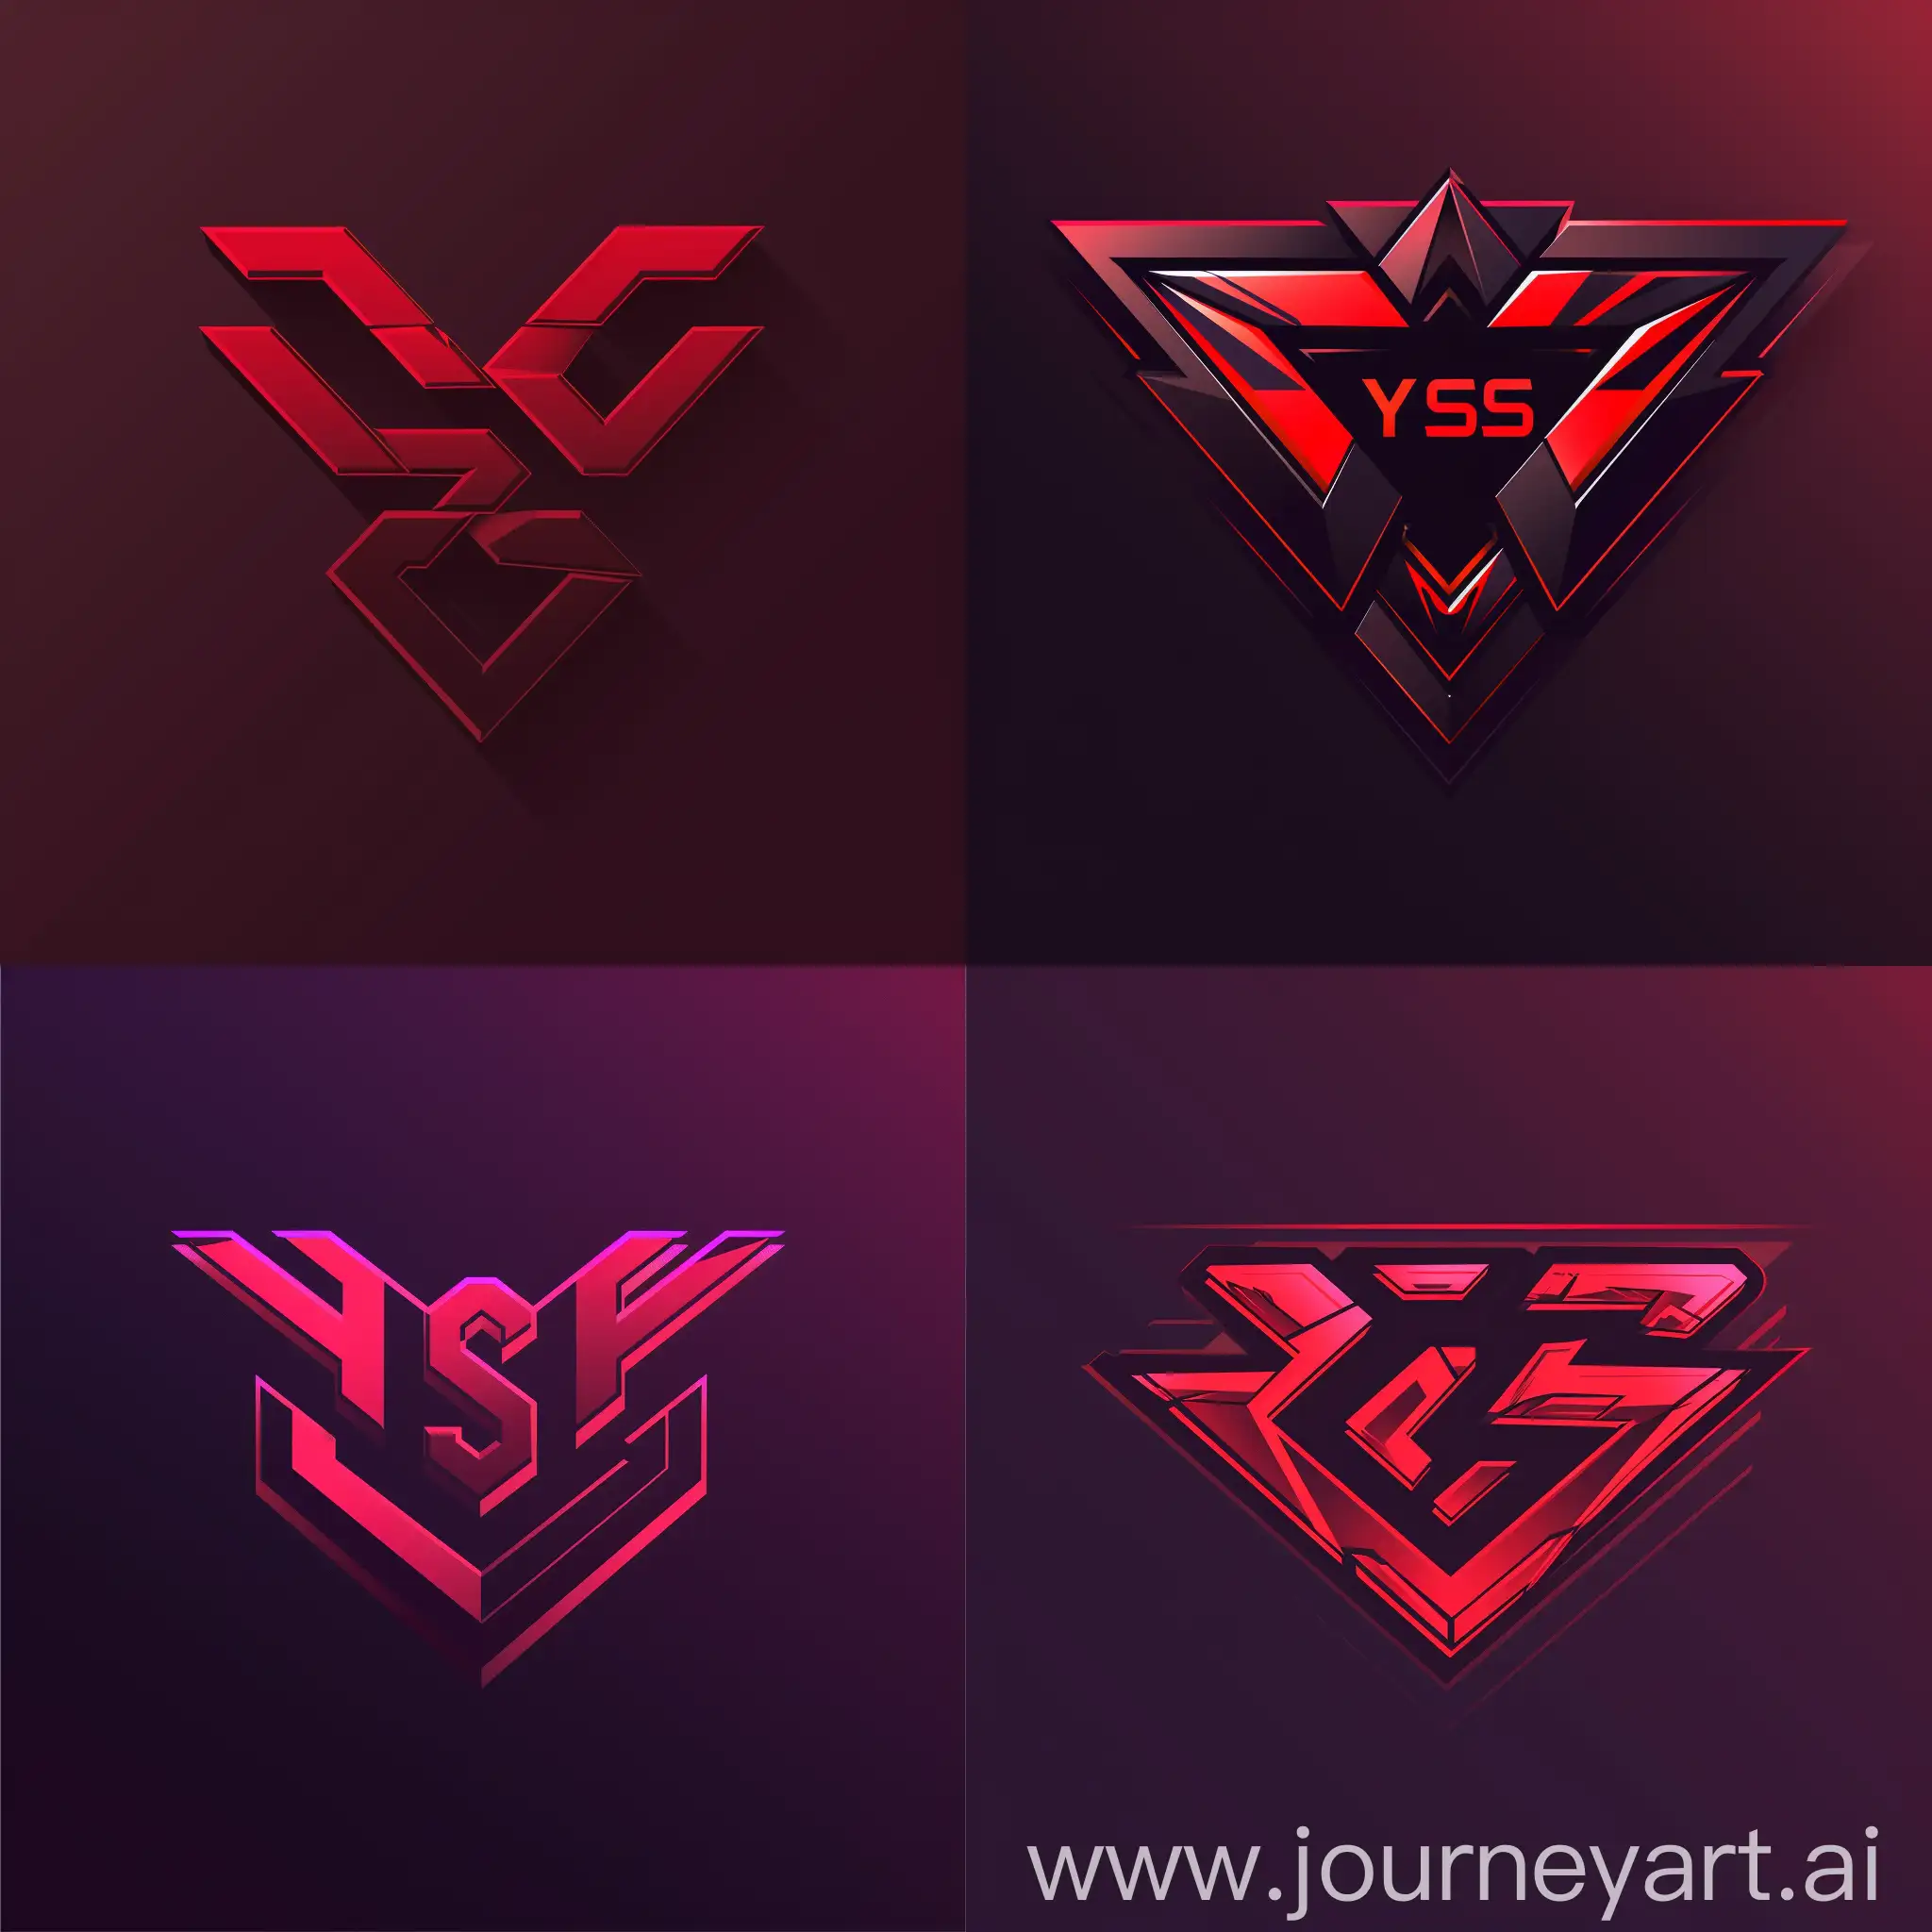 Dynamic-Gaming-Logo-YSS-with-Intriguing-Dark-Red-Styling